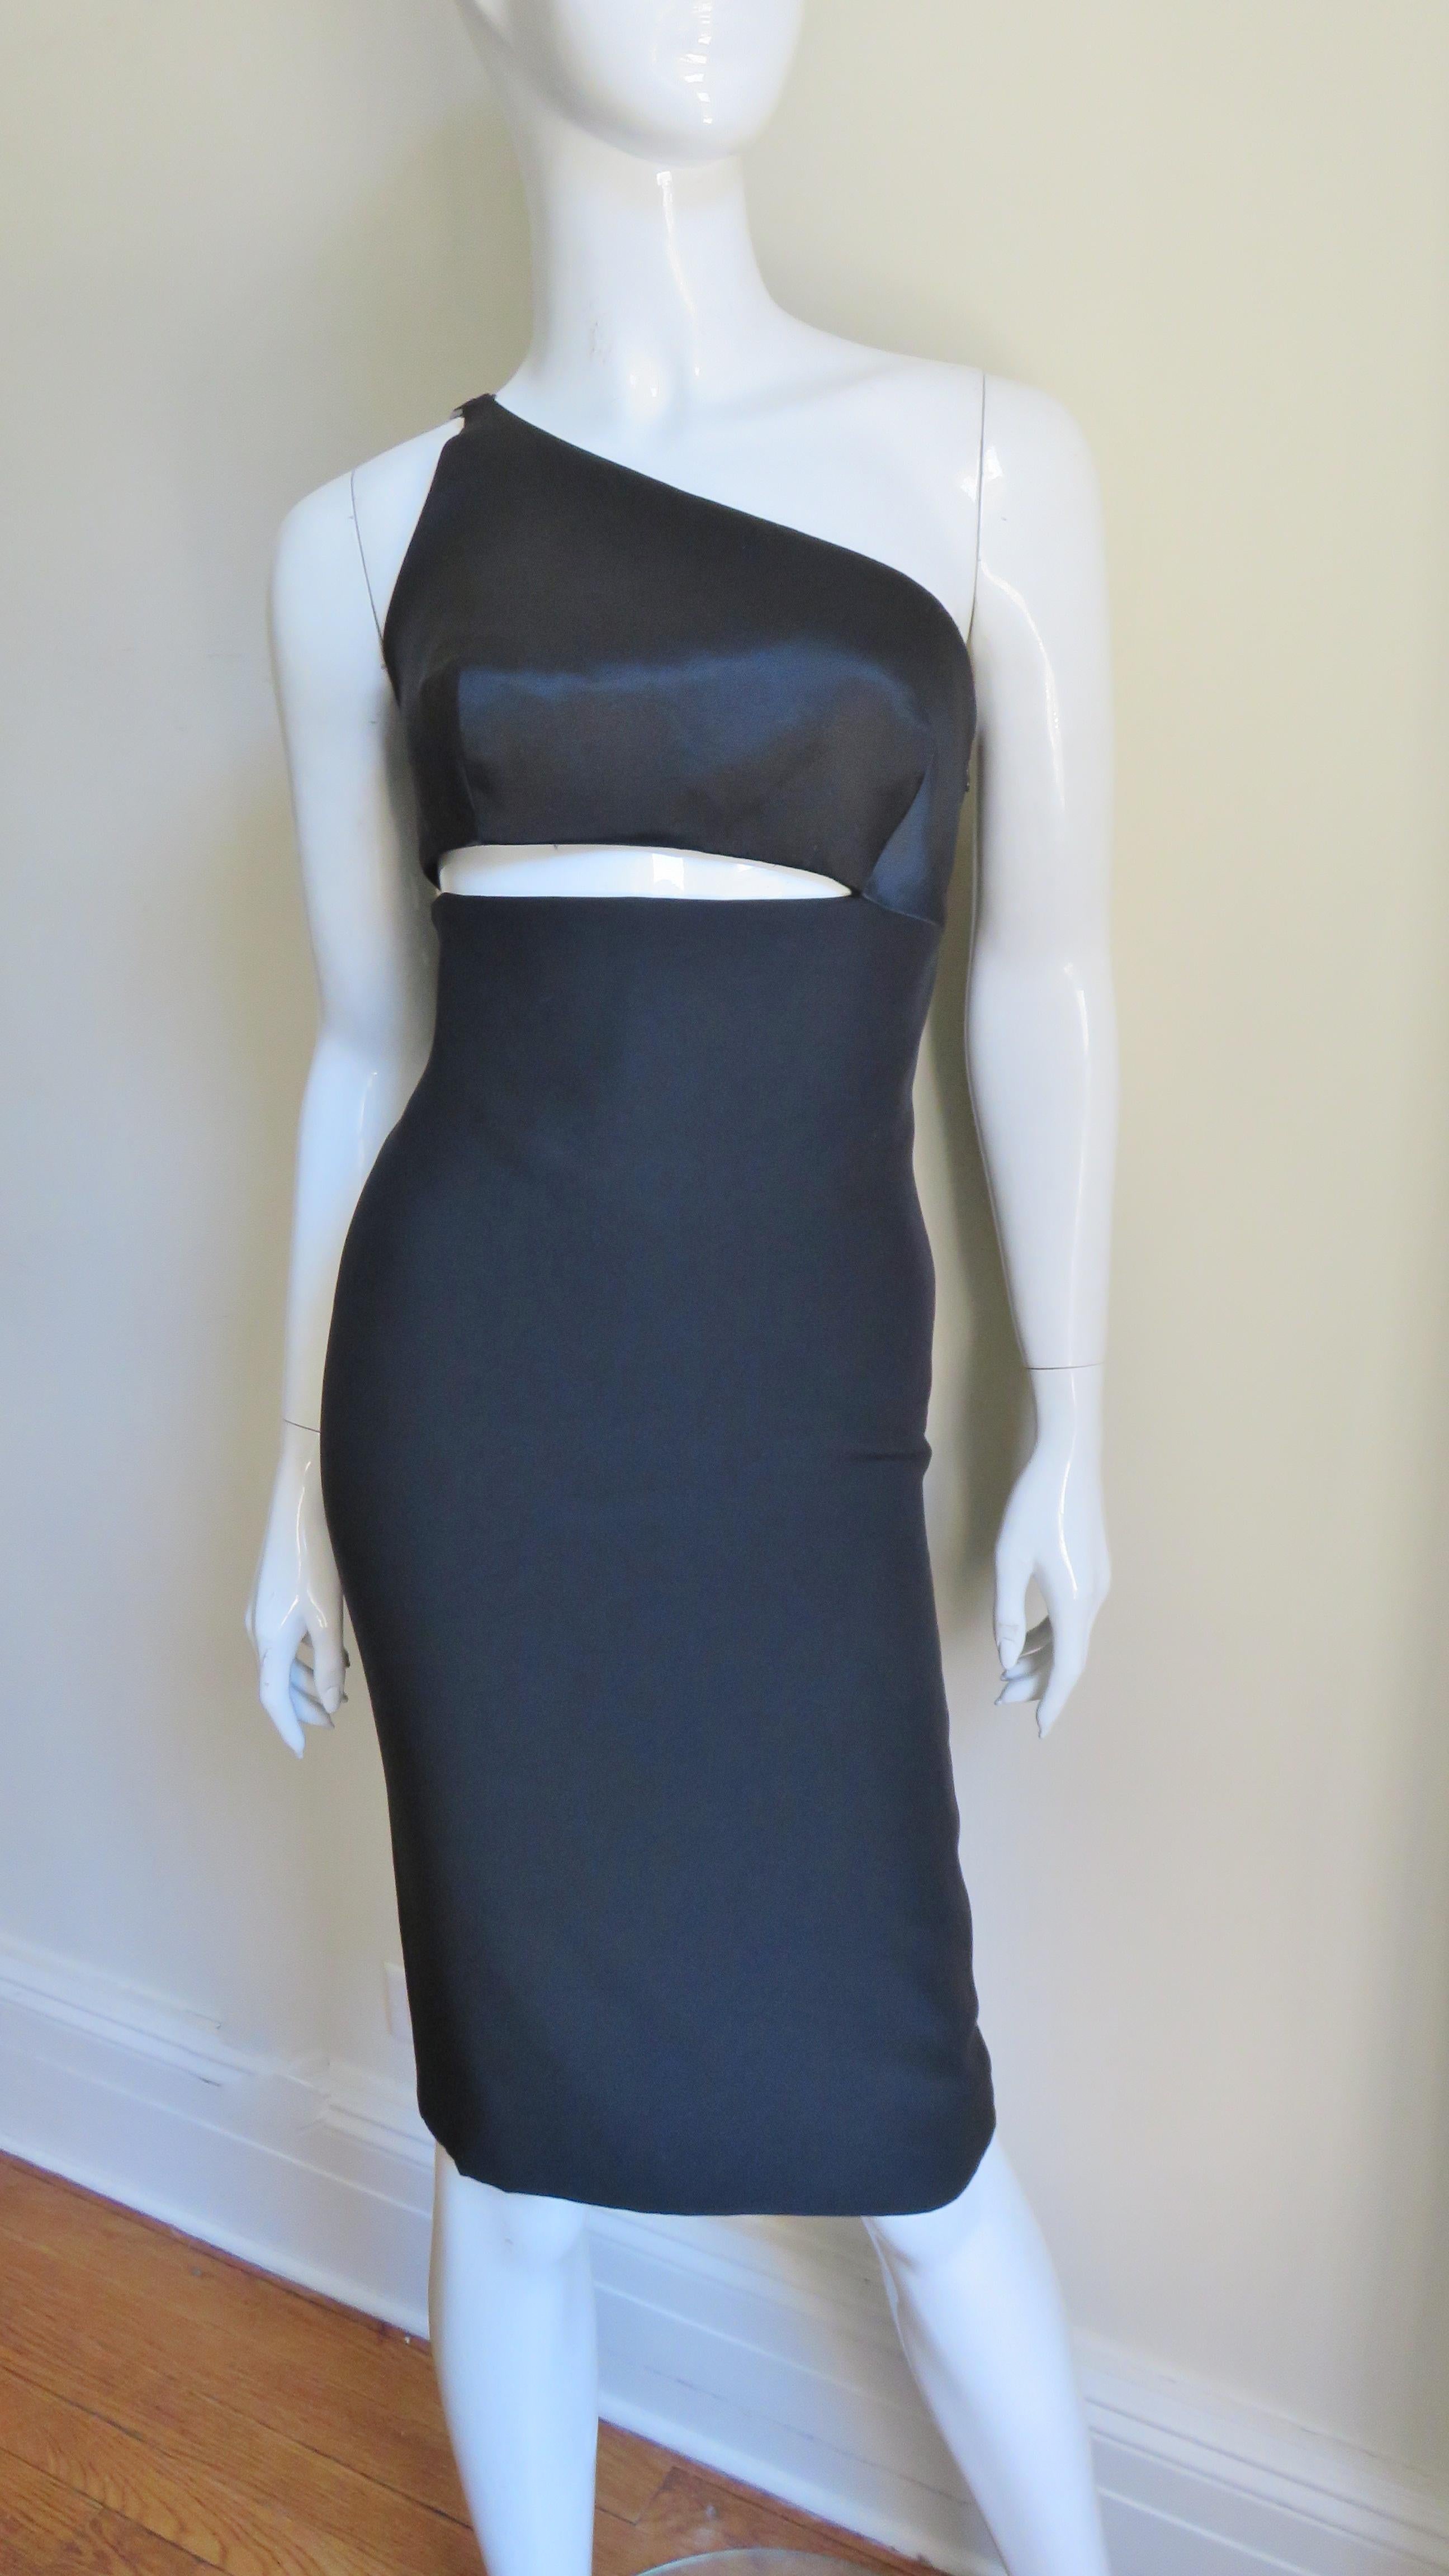 Gianni Versace One Shoulder Dress with Cut out In Good Condition For Sale In Water Mill, NY